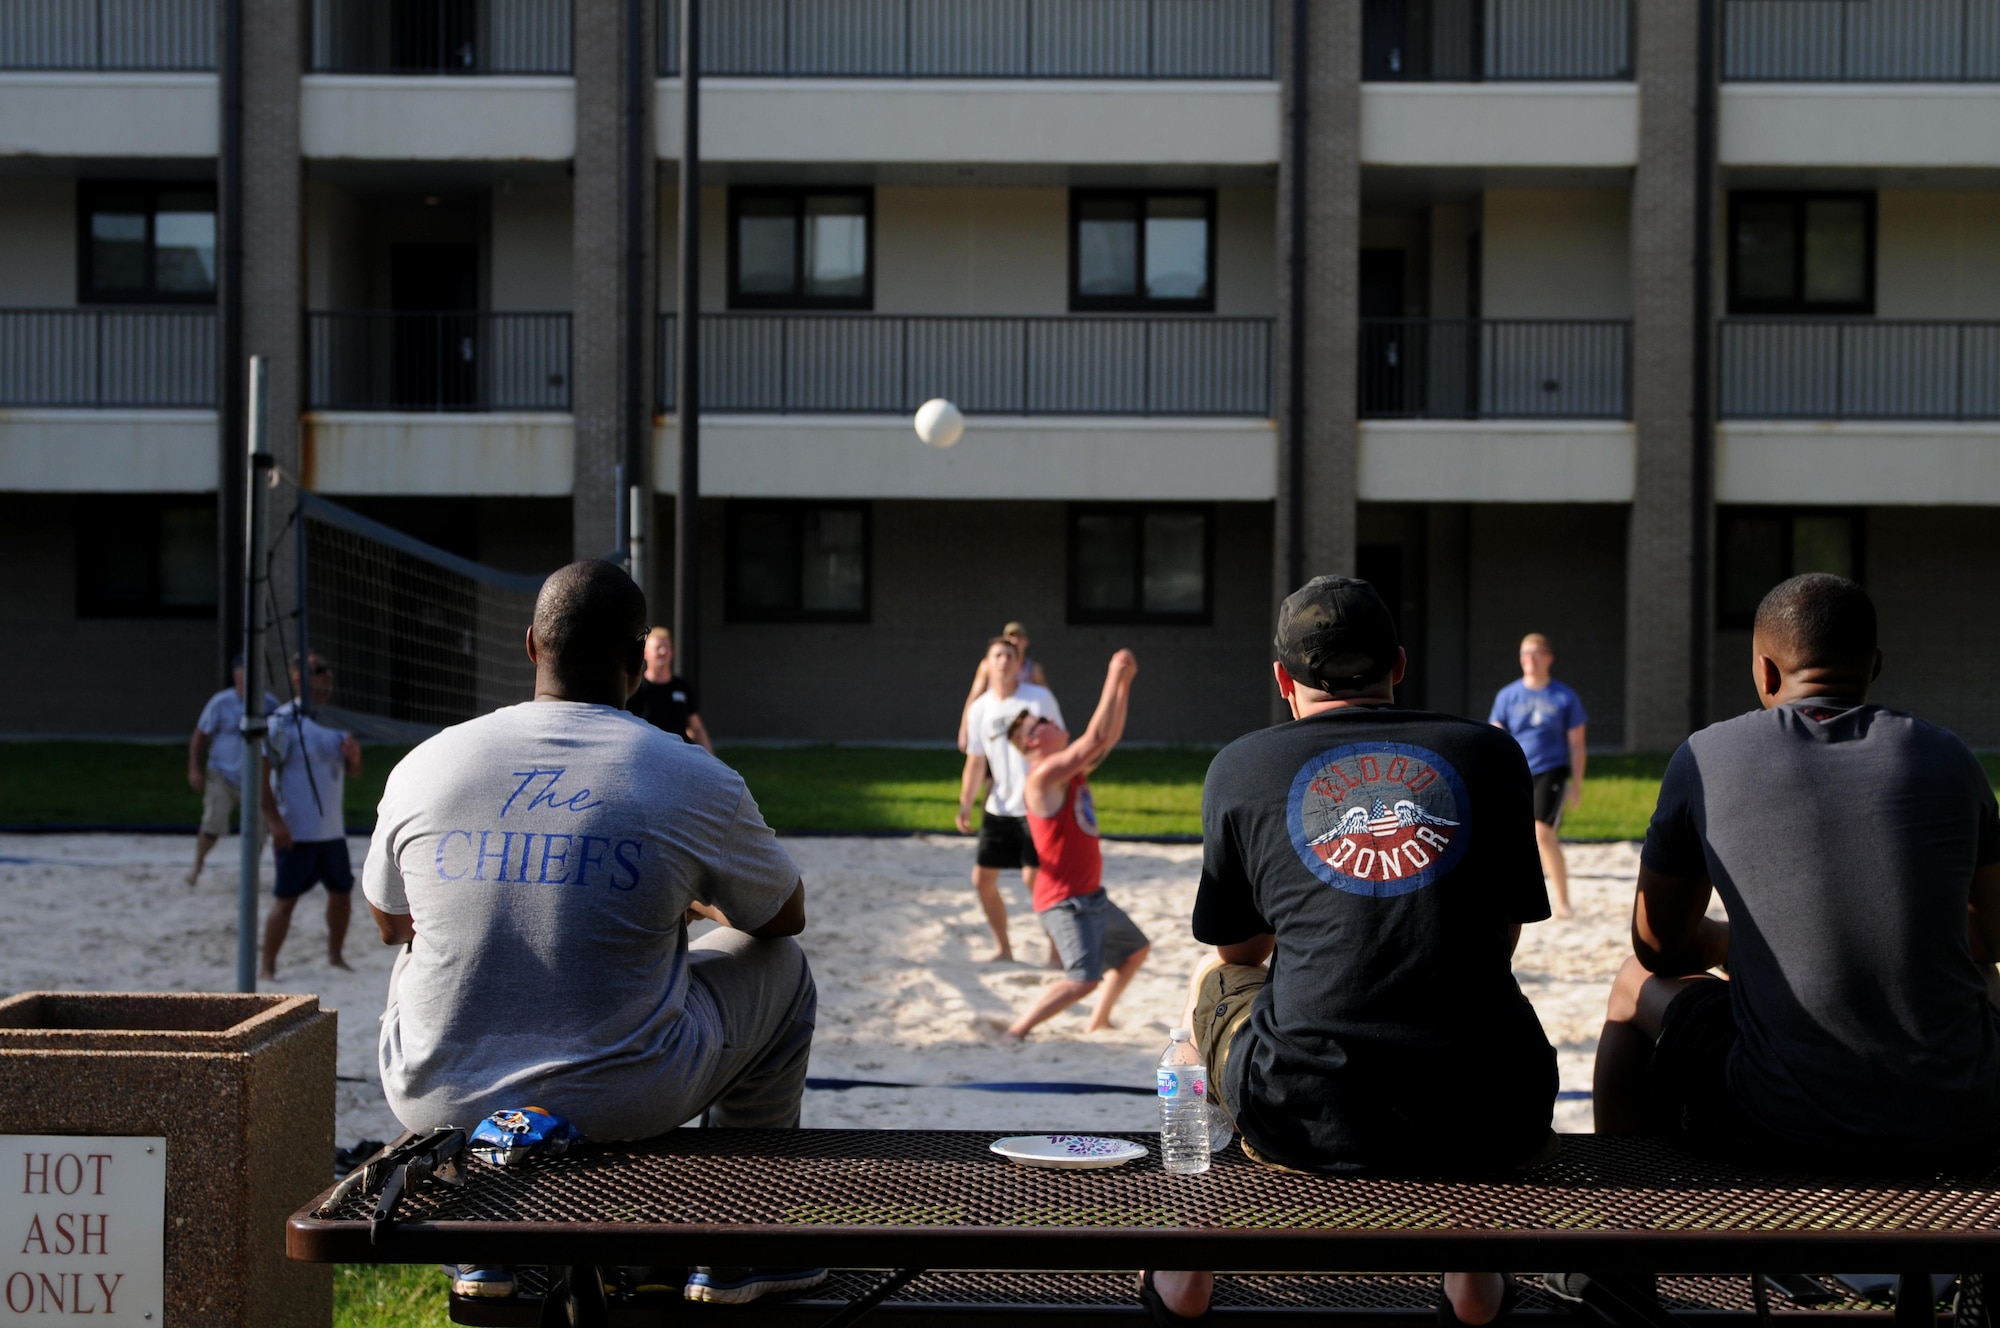 Spectators watch dorm residents and Keesler chief master sergeants play volleyball during the 2017 Dorm Bash at the Biloxi Hall courtyard August 1, 2017, on Keesler Air Force Base, Miss. The Dorm Bash was sponsored by the Keesler Chiefs Group to provide an opportunity for Keesler dorm residents to spend time together in fellowship. The chief master sergeants took home the Battle of the Bash Dragon award. (U.S. Air Force photo by Airman 1st Class Suzanna Plotnikov)